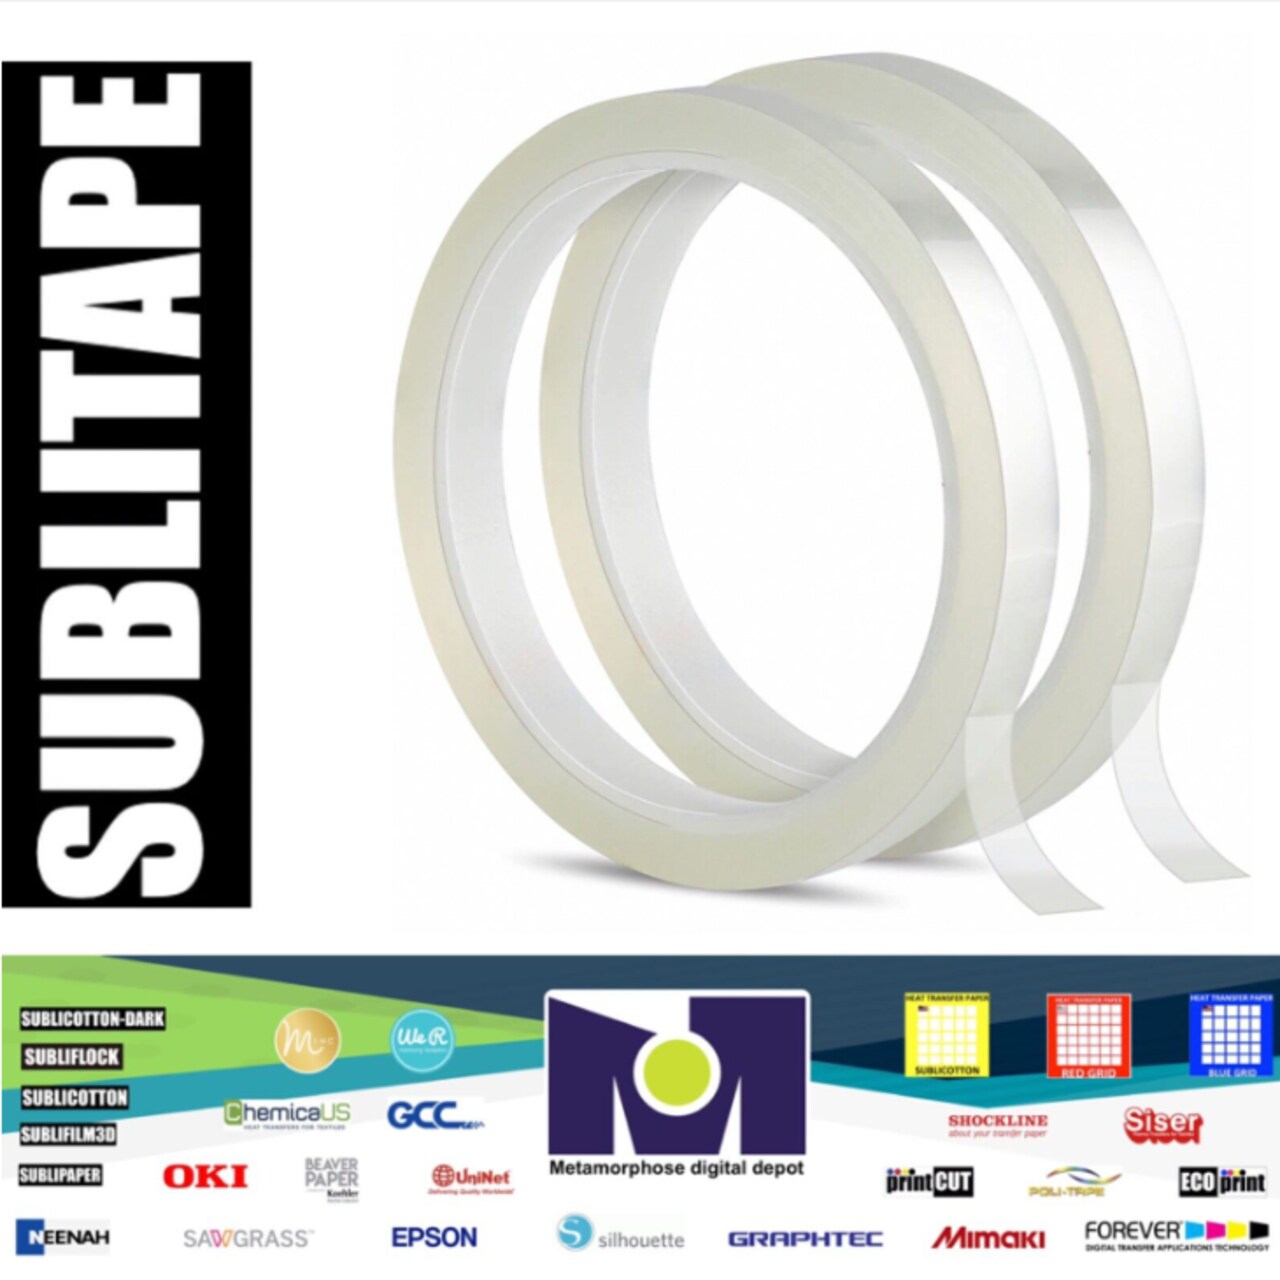 heat Tape, 2 mil Teflon Clear Tape 1/2, Heat Tape for sublimation and  transfers